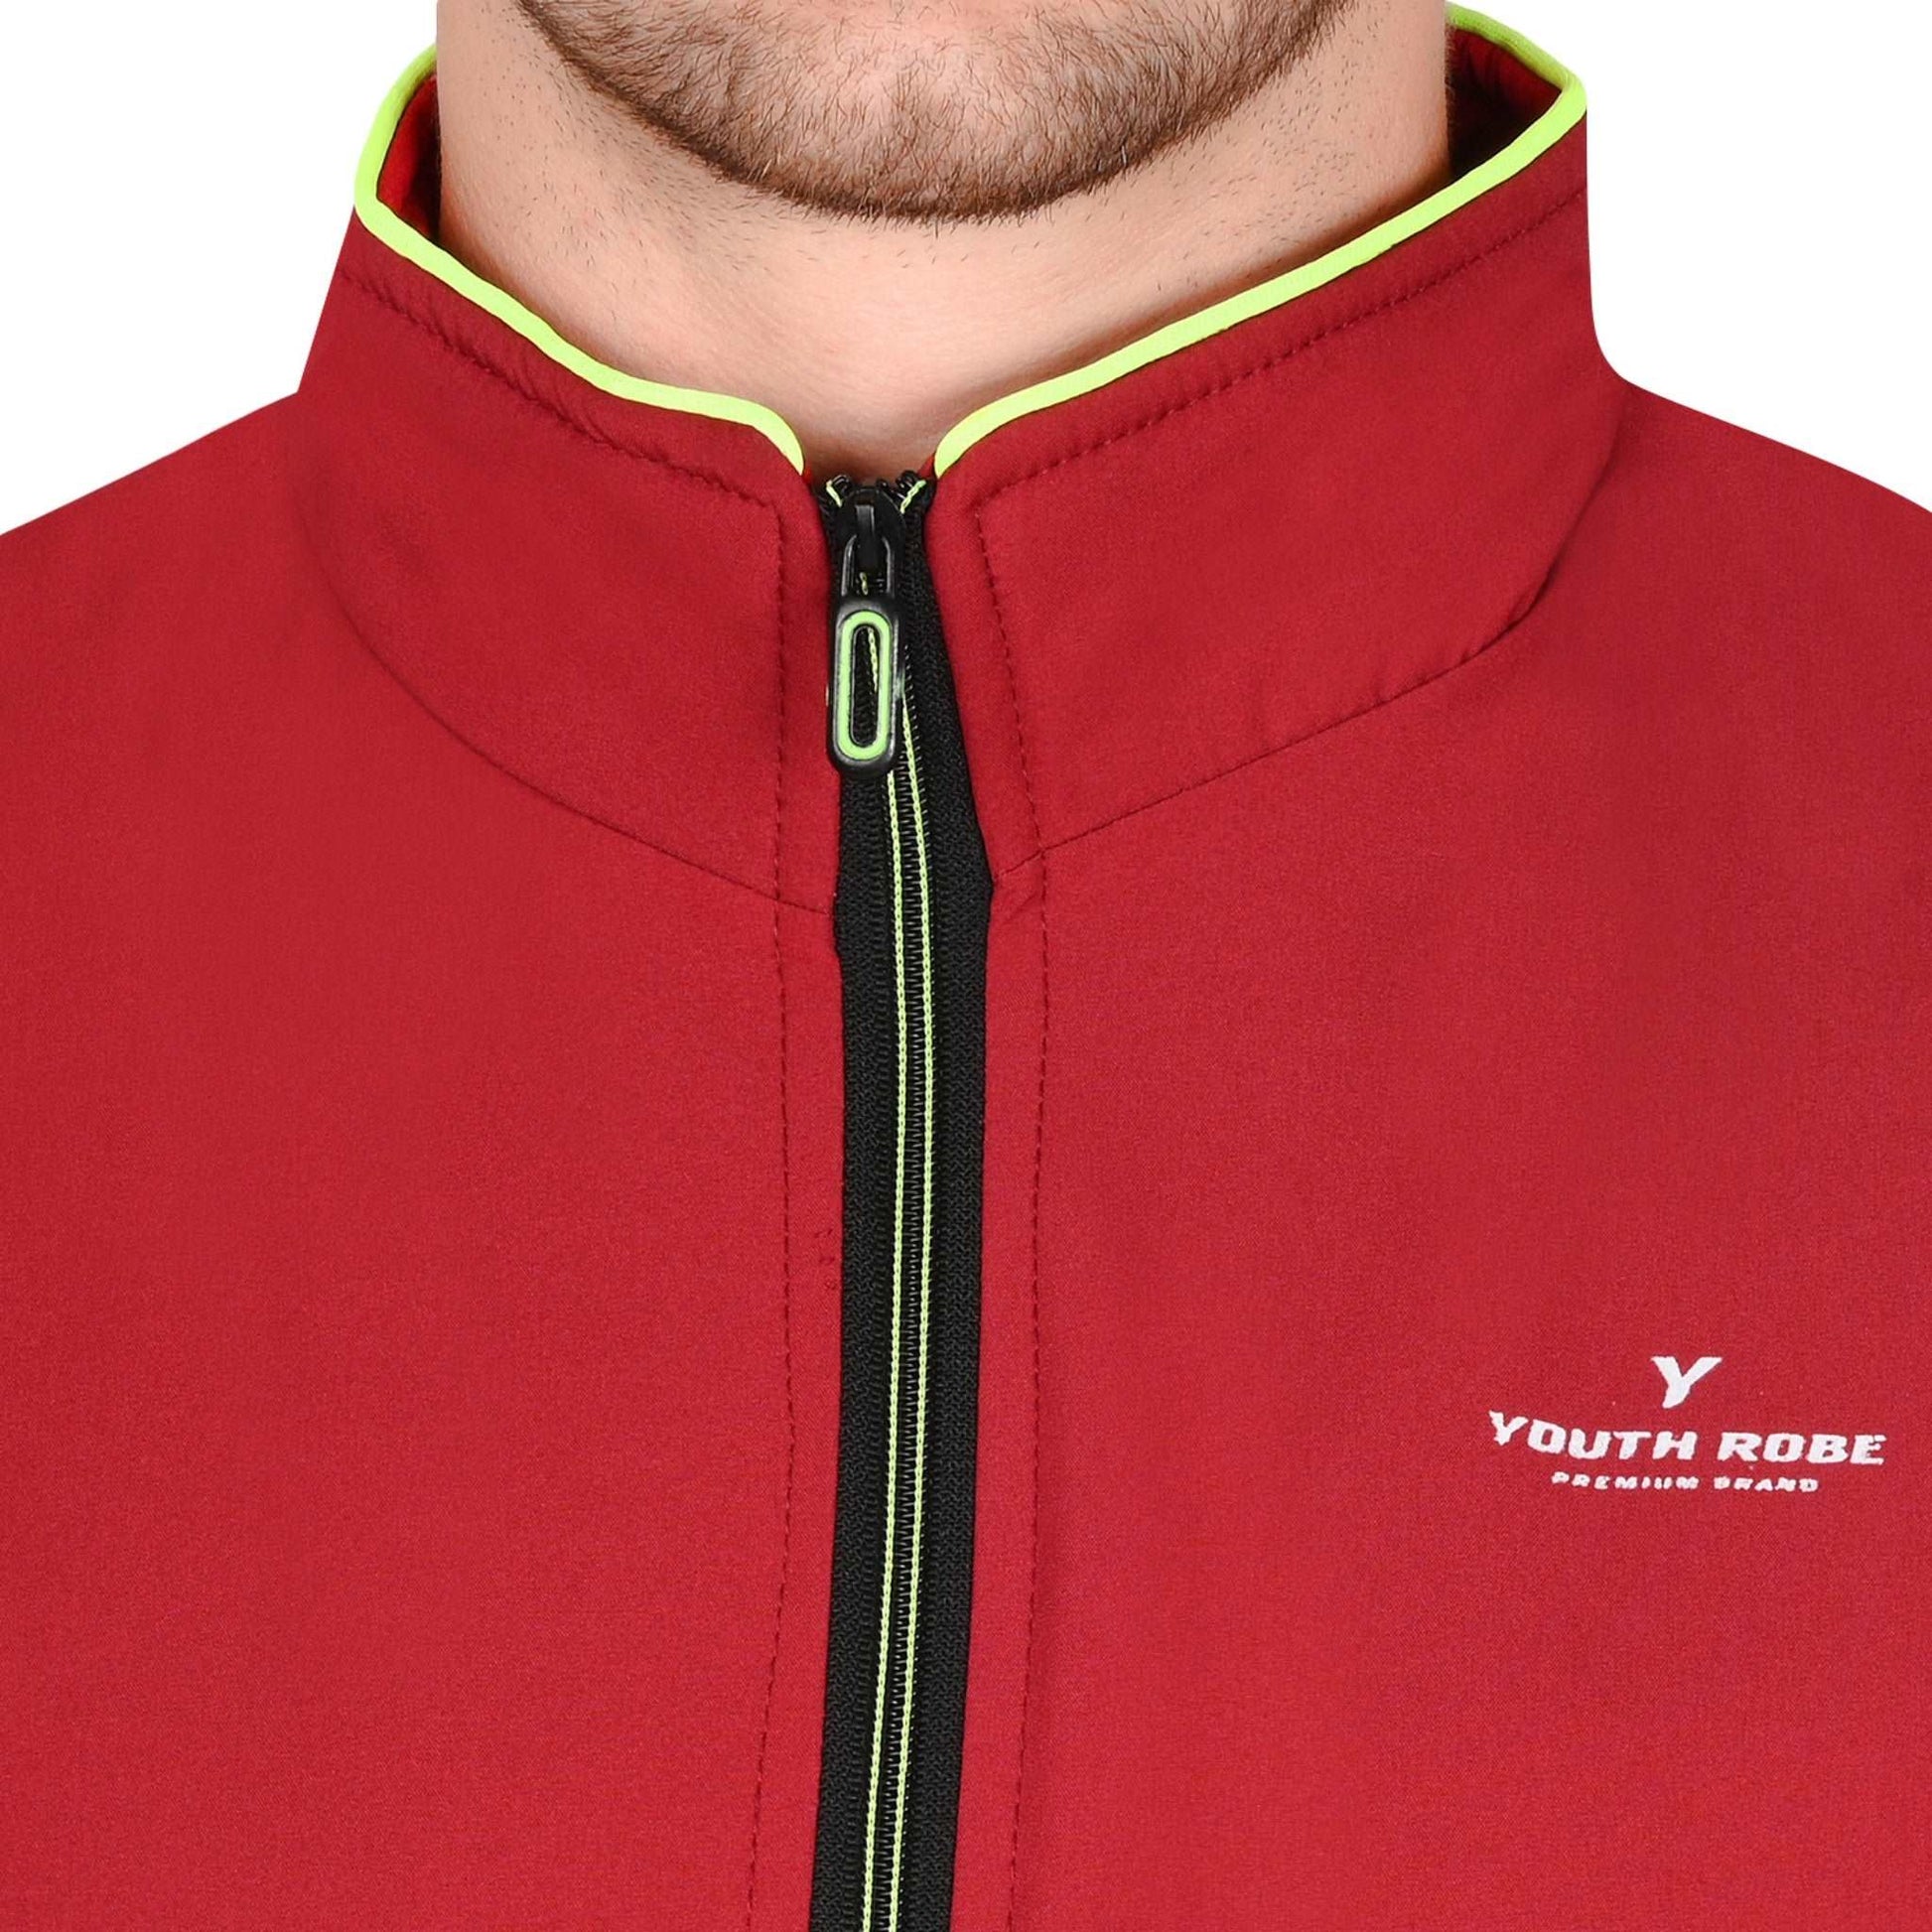 YOUTH ROBE's Honeycomb Jacket - Red - YOUTH ROBE